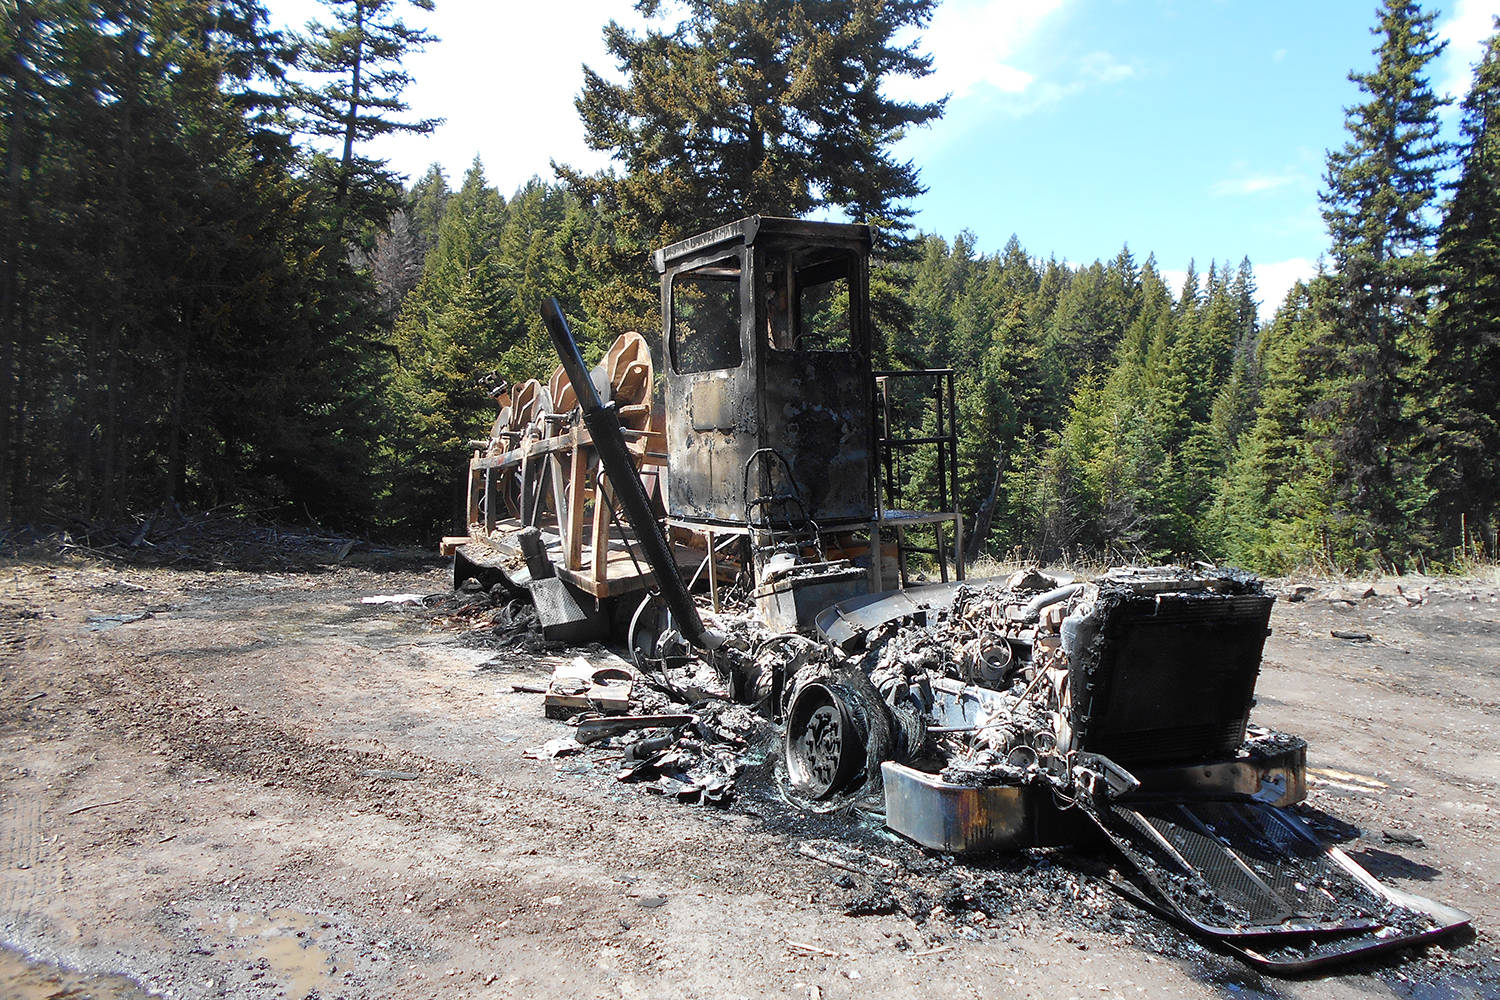 A blue Peterbilt rope truck on a Trans Mountain Expansion Project site near Merritt, B.C. was the target of an act of vandalism and theft one day and the subject of a suspicious blaze another. (Contributed)